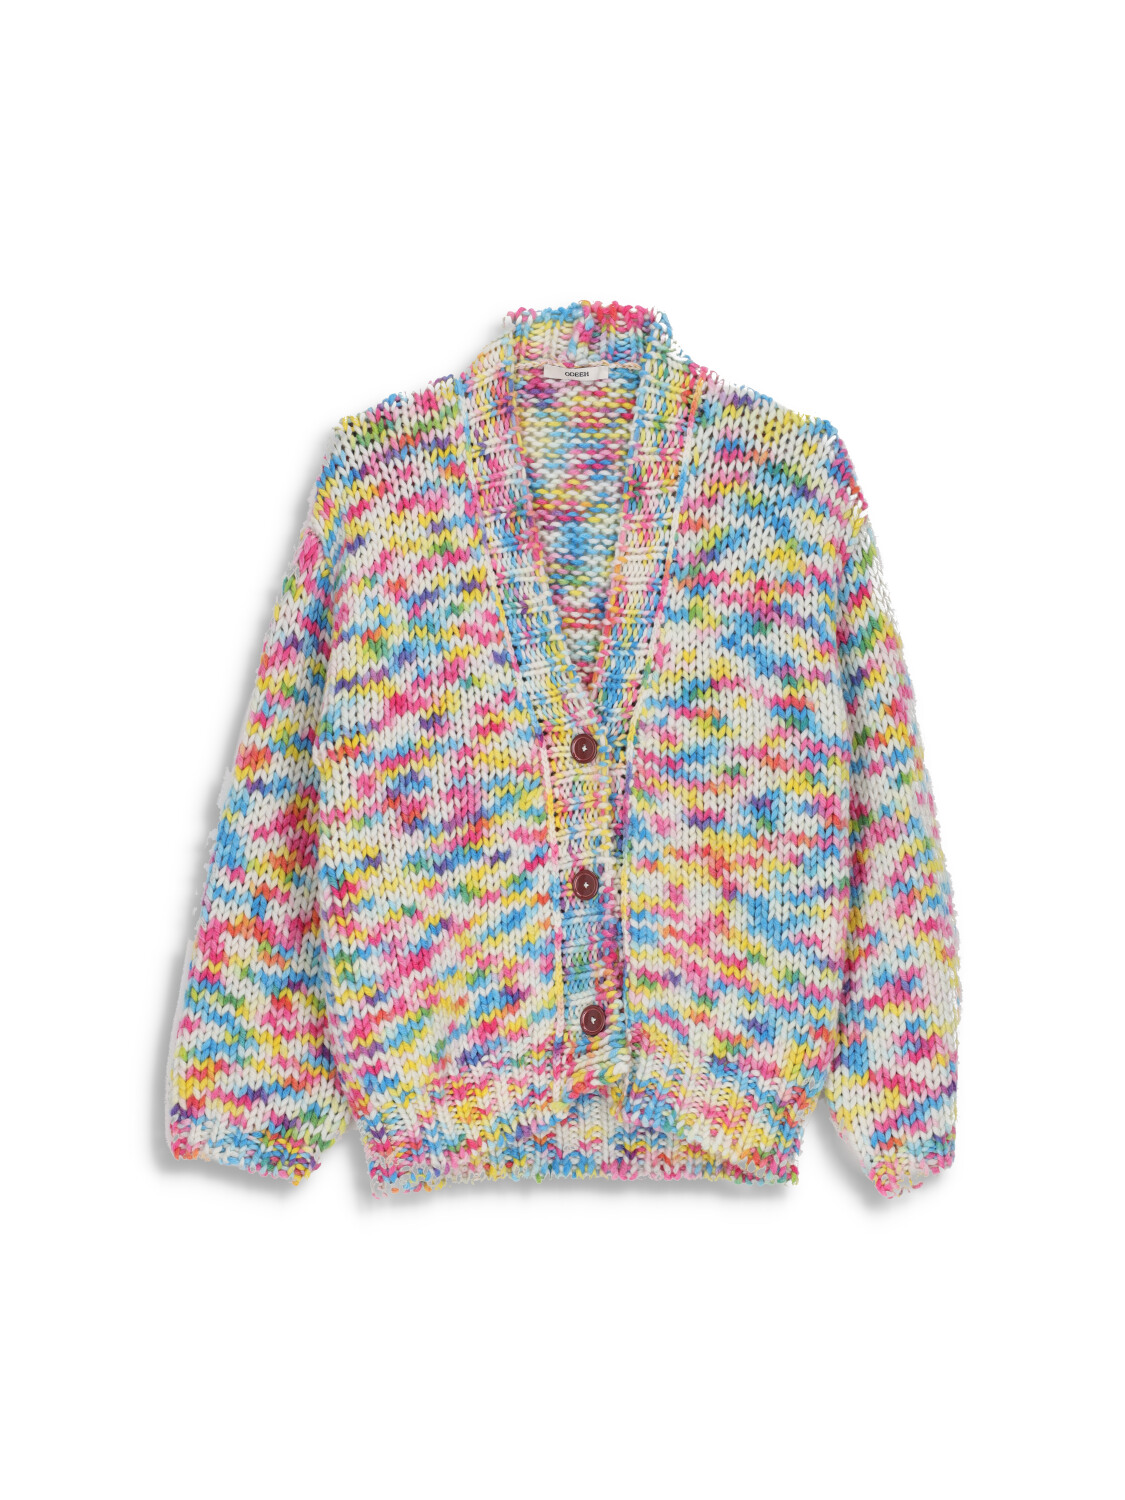 Multicolor printed wool sweater - long sleeve cardigan with colorful pattern